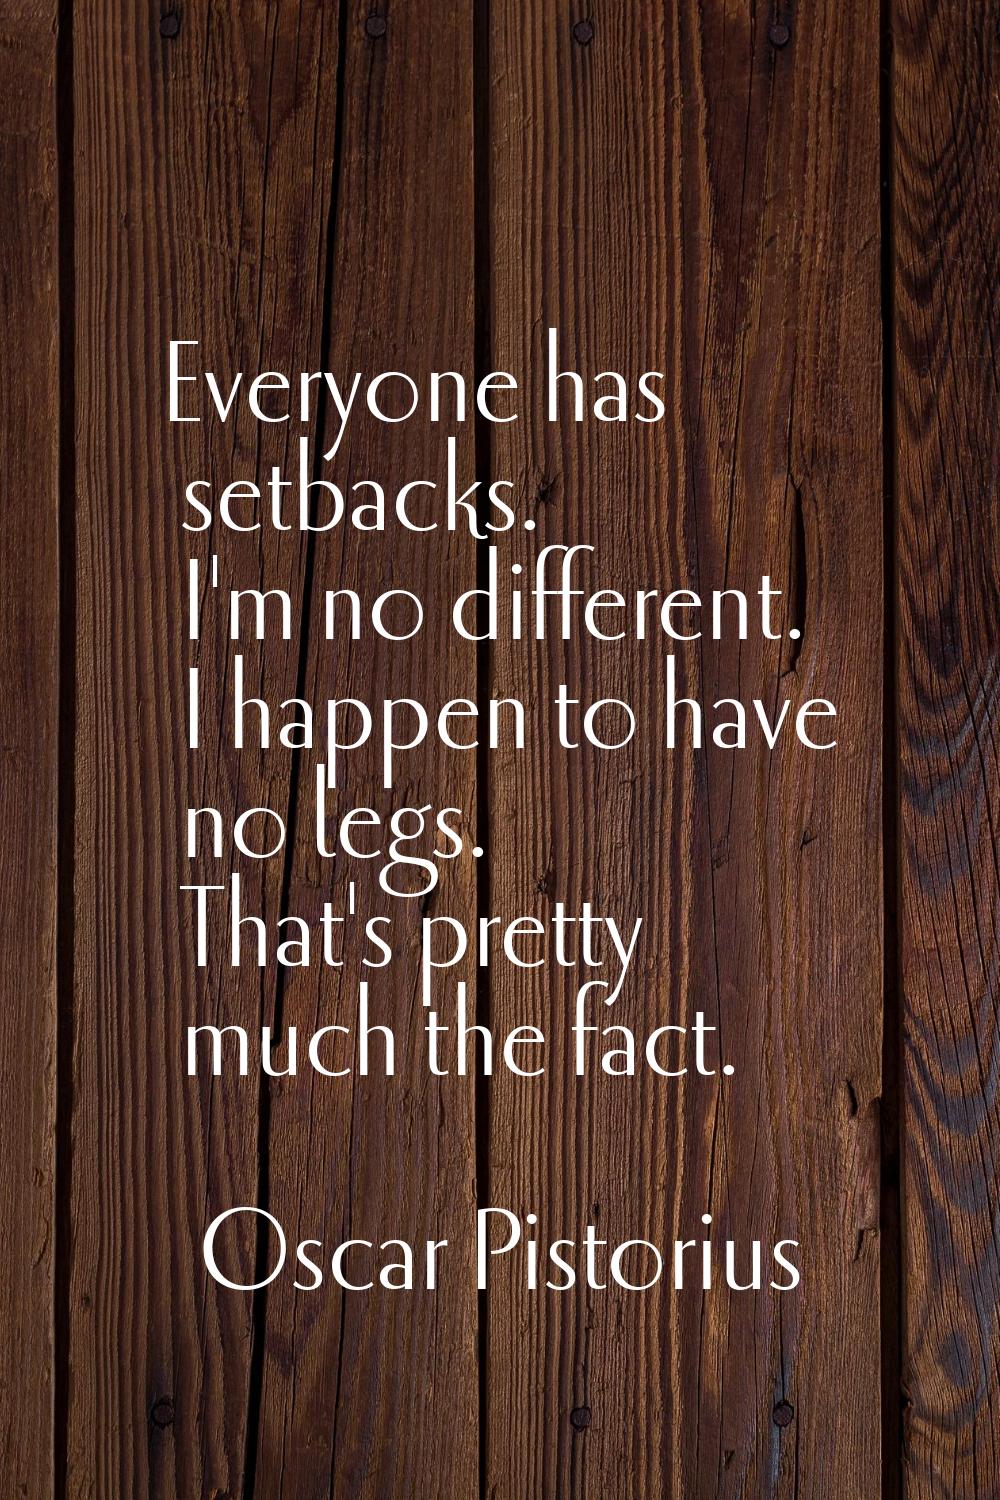 Everyone has setbacks. I'm no different. I happen to have no legs. That's pretty much the fact.